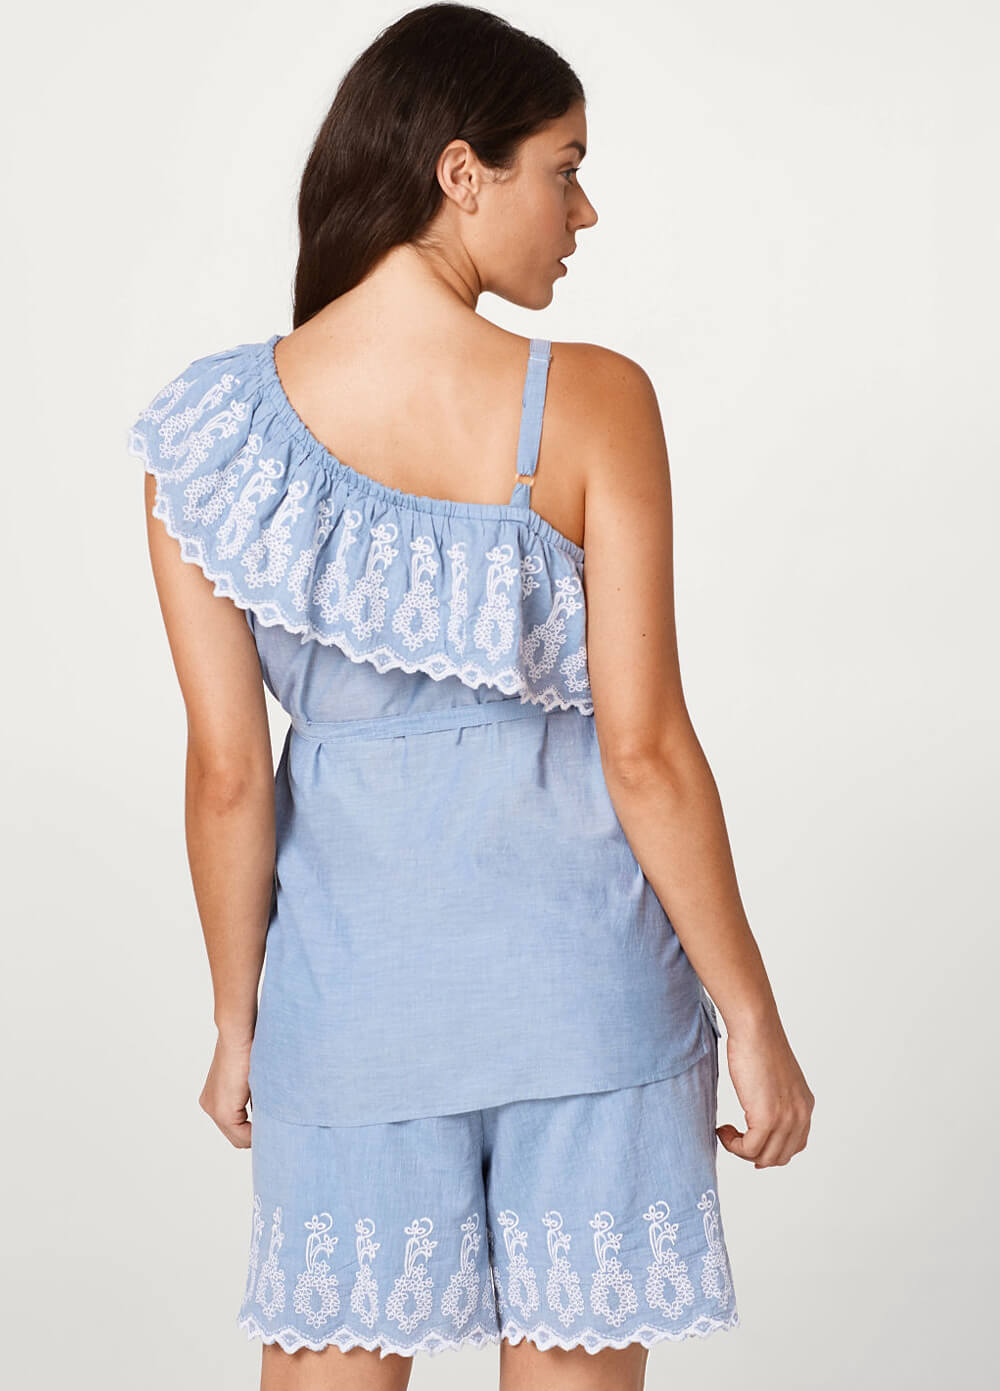 Maternity One Shoulder Flounce Top in Blue by Esprit